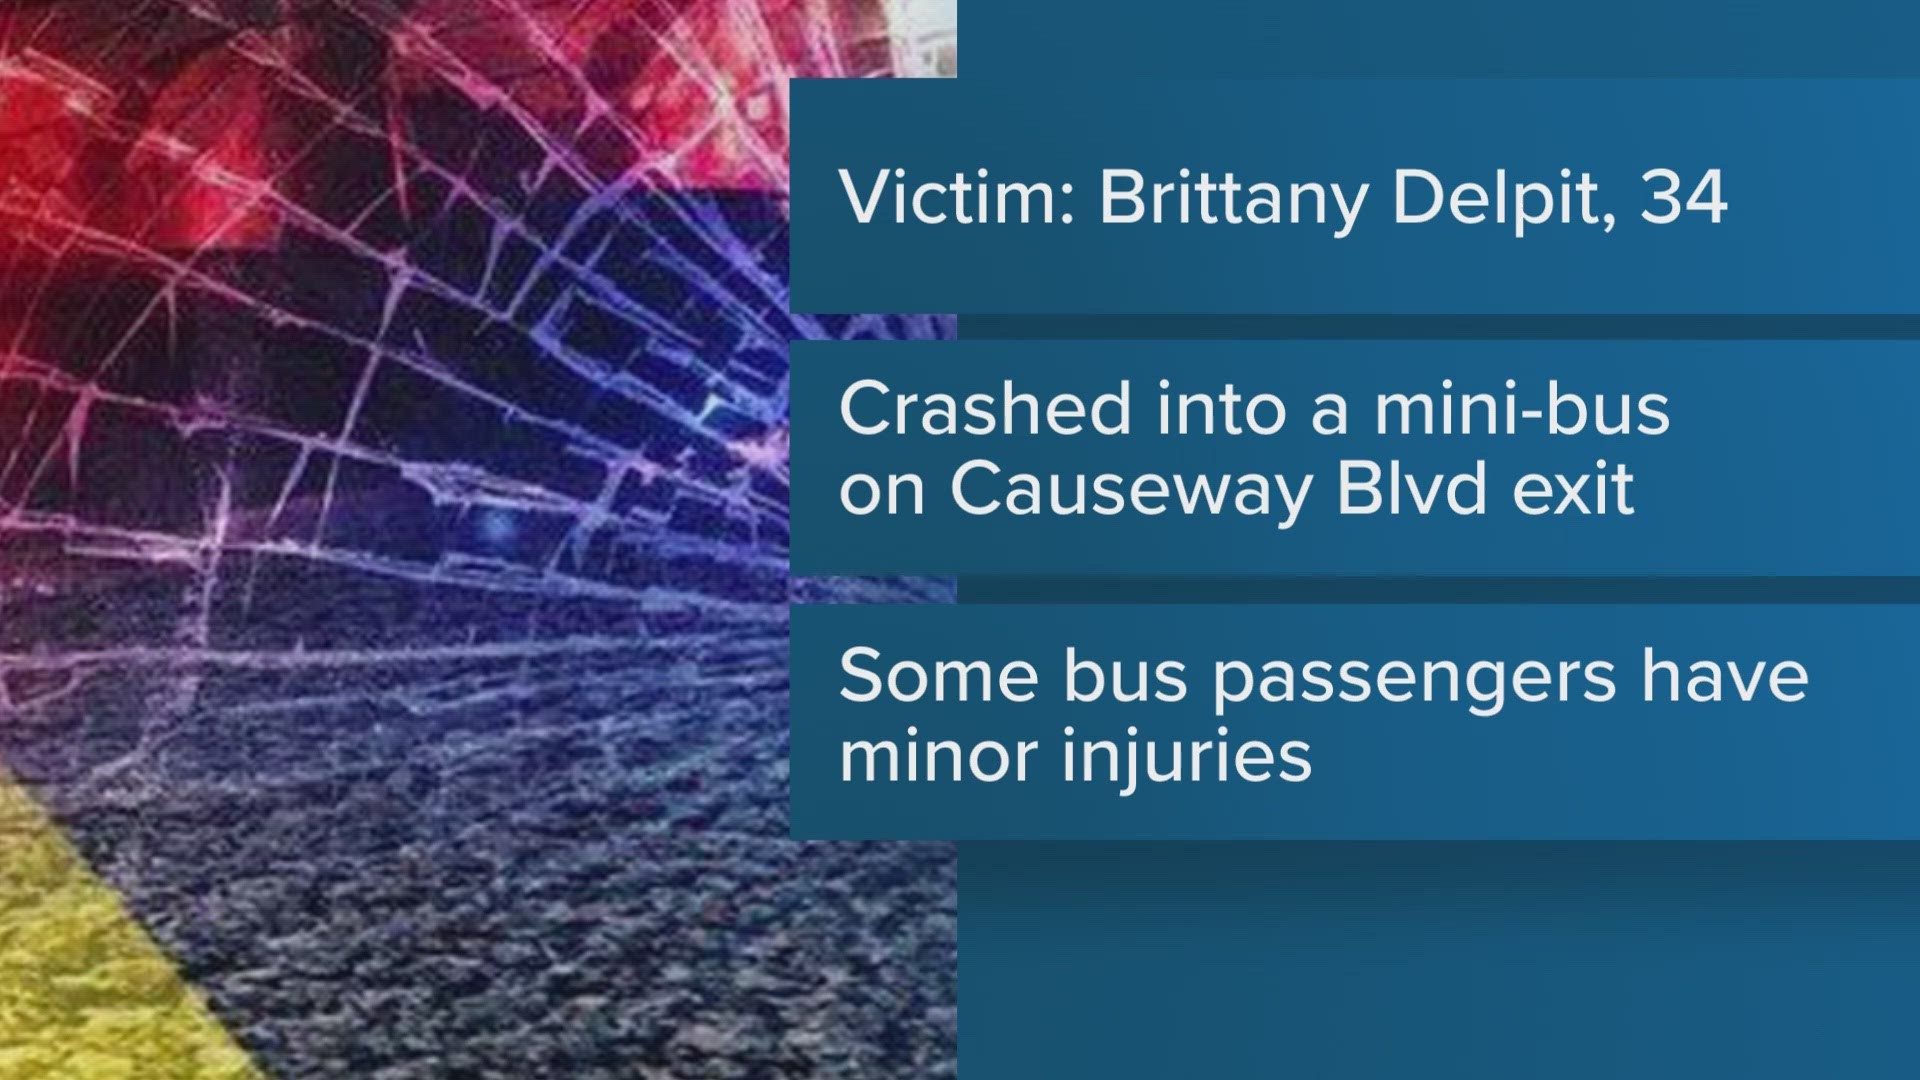 Louisiana State Police identified the victim as 34-year-old Brittany M. Delpit.